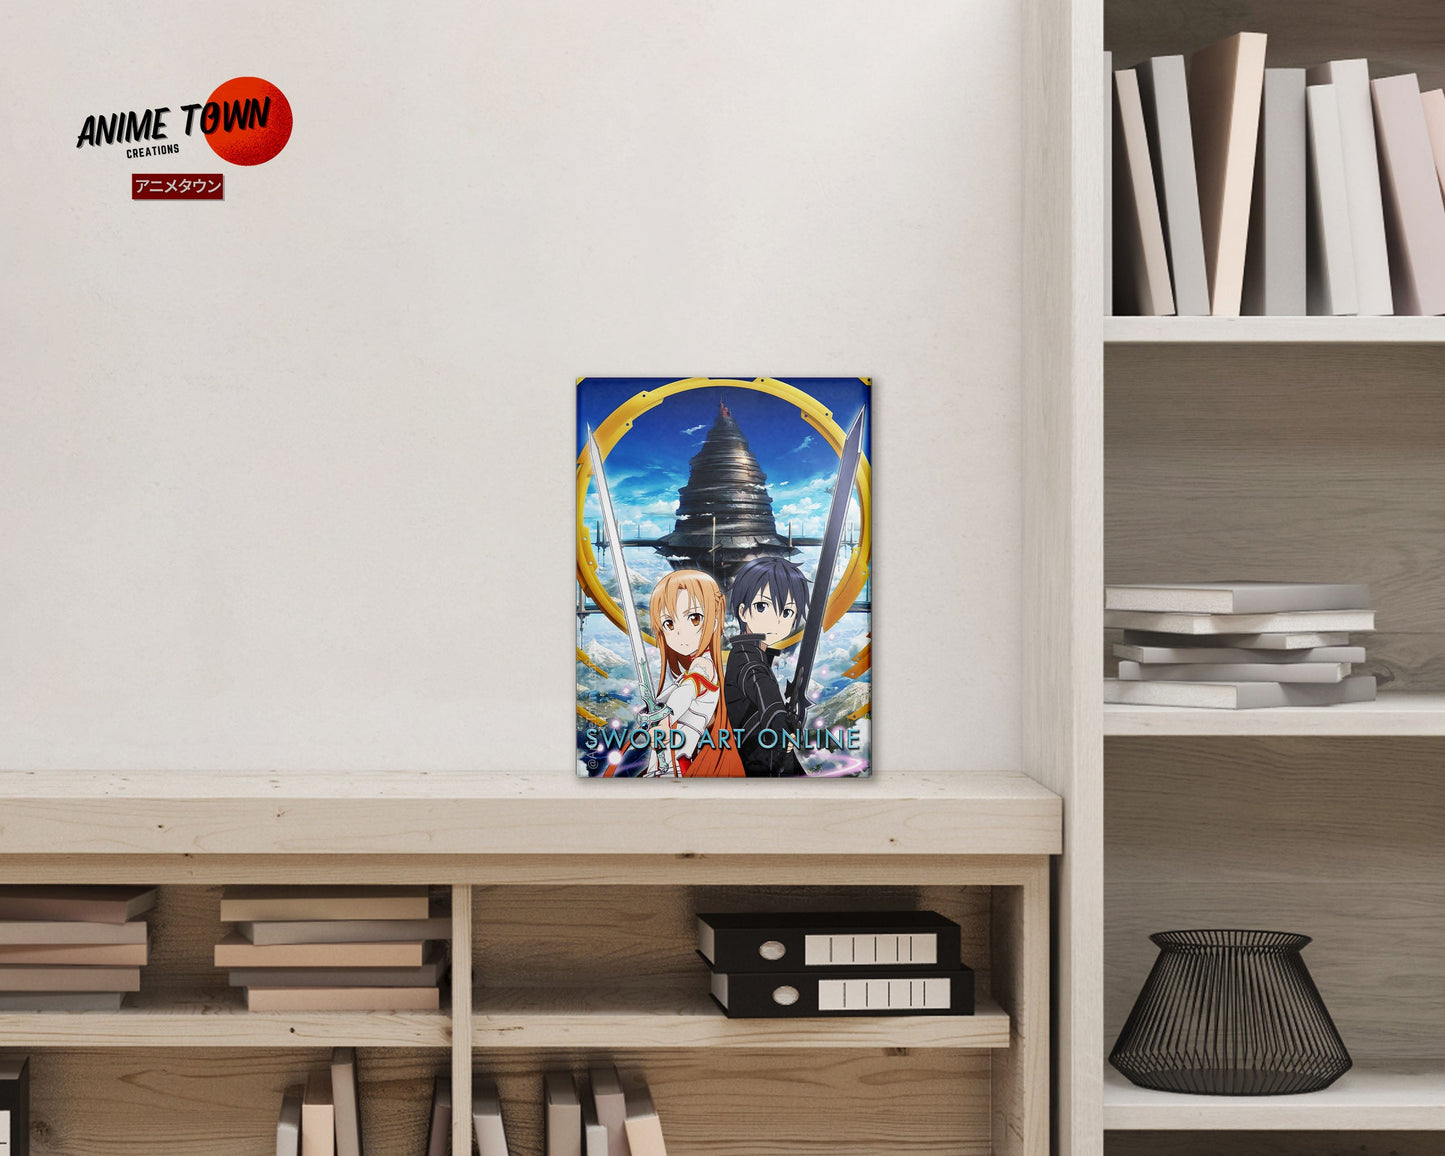 Anime Town Creations Metal Poster Sword Art Online 24" x 36" Home Goods - Anime Spy x Family Metal Poster